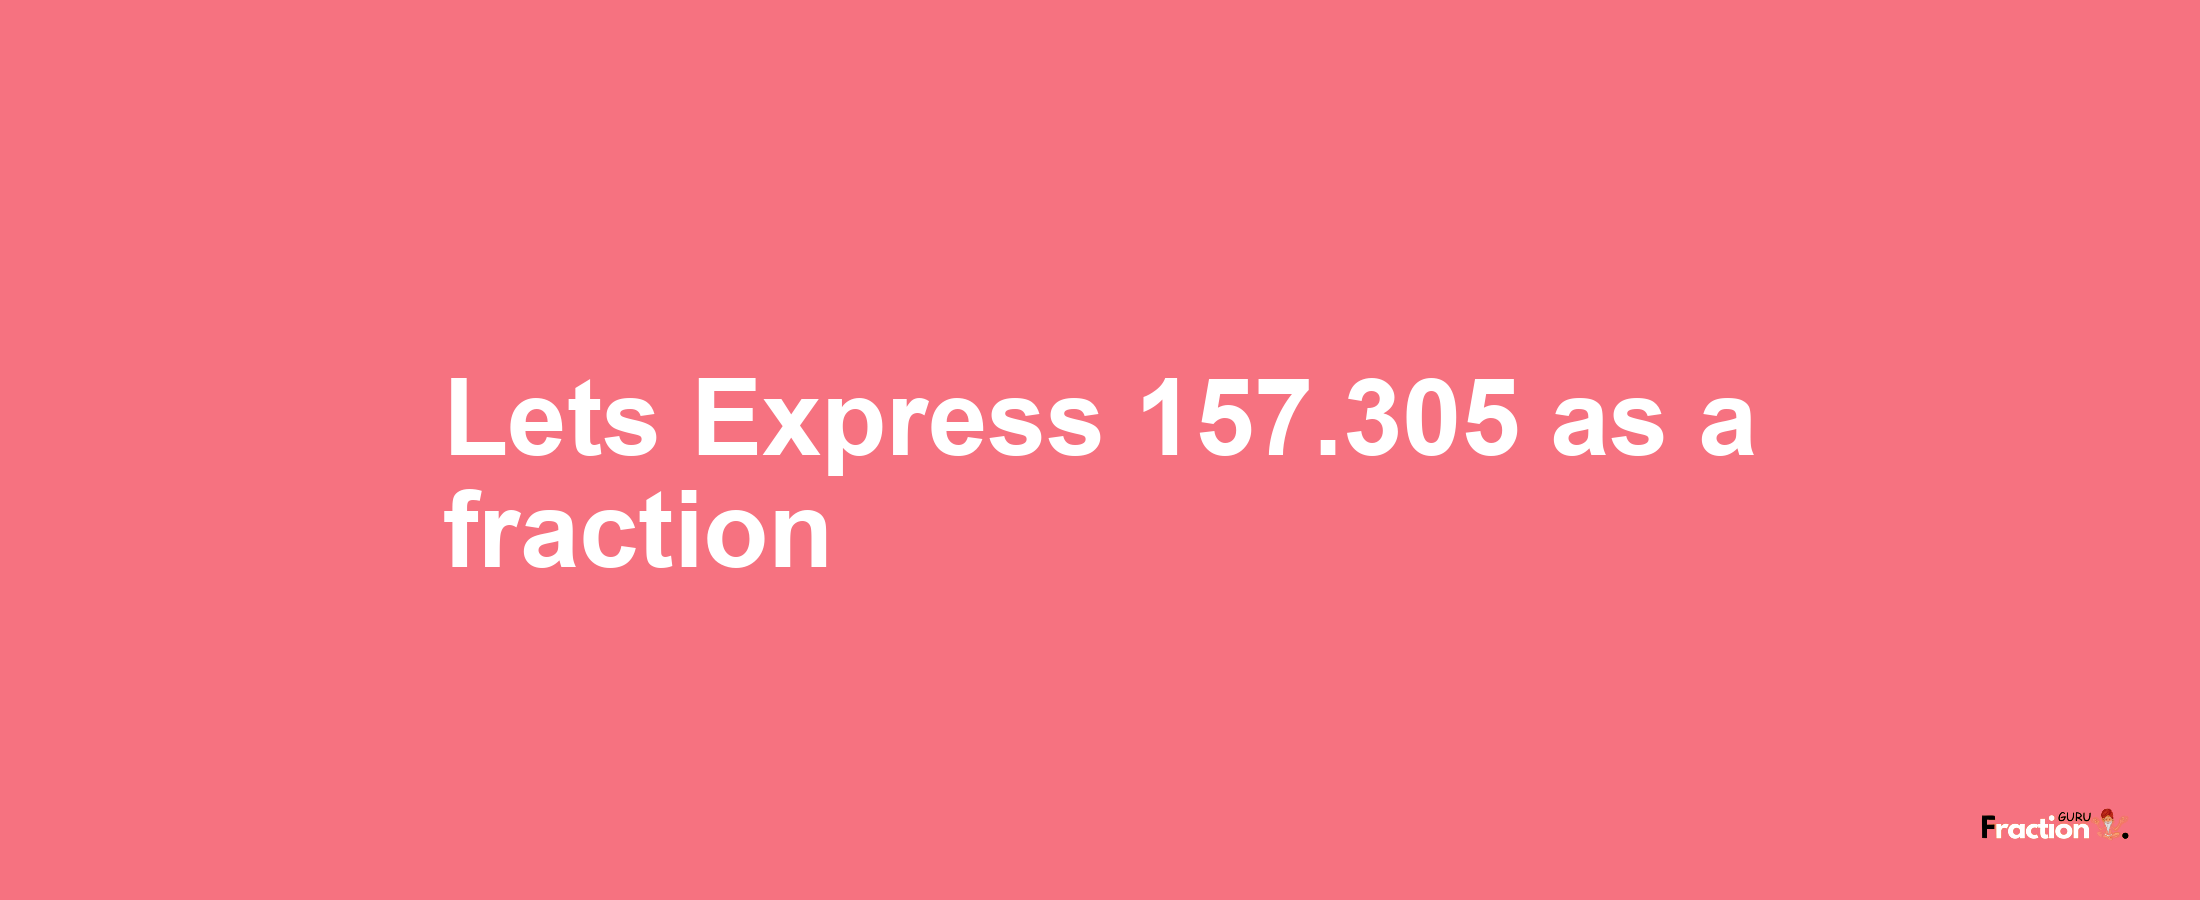 Lets Express 157.305 as afraction